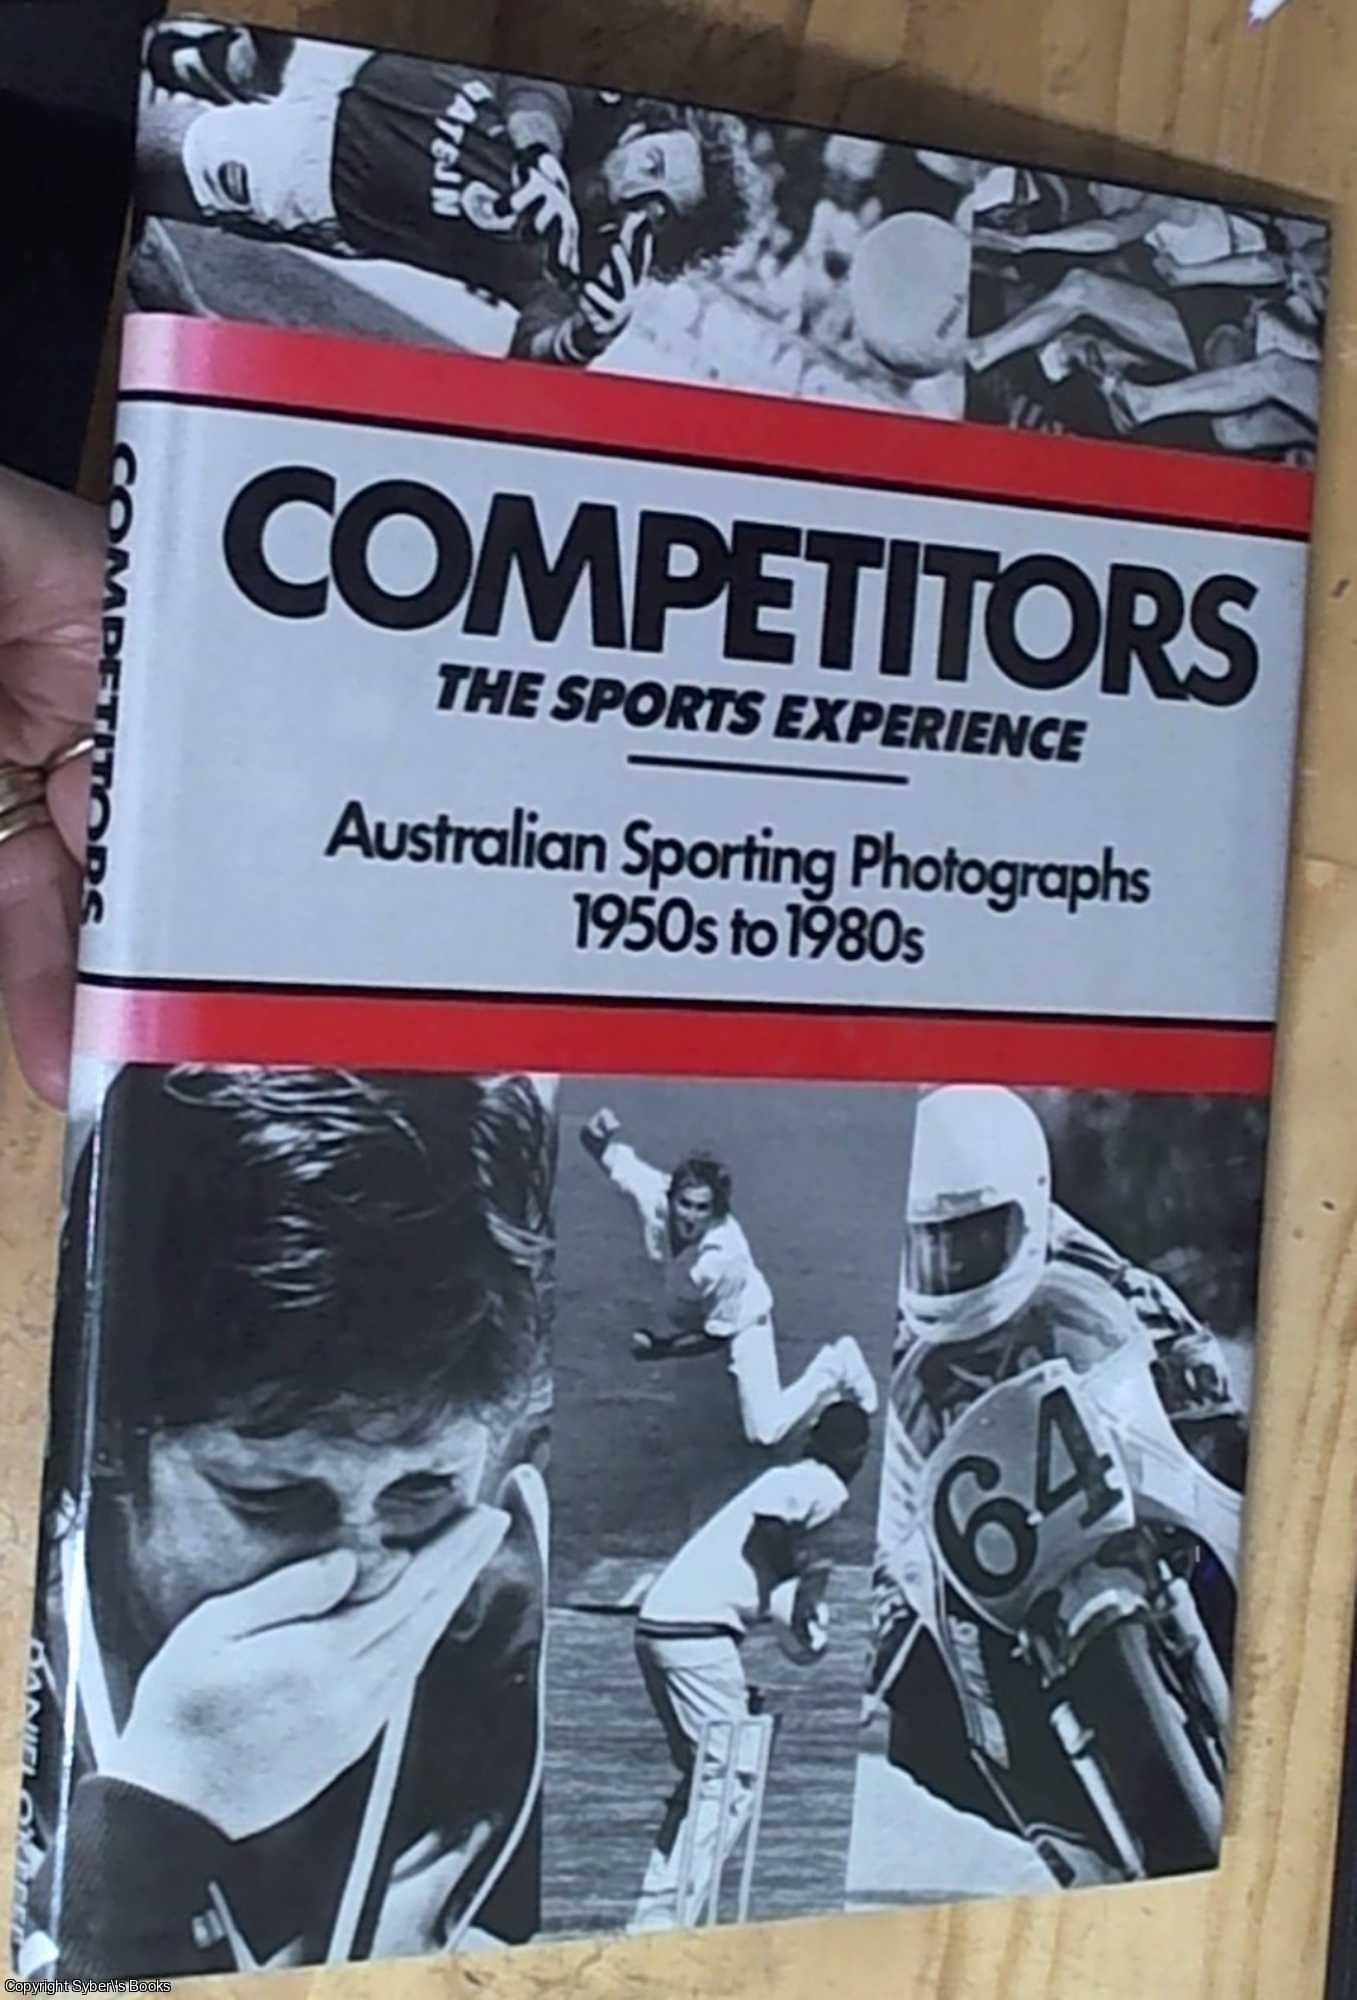 O'Keefe, Daniel & Atkinson, Ann - Competitors: The Sports Experience : Australian Sporting Photographs 1950s to 1980s